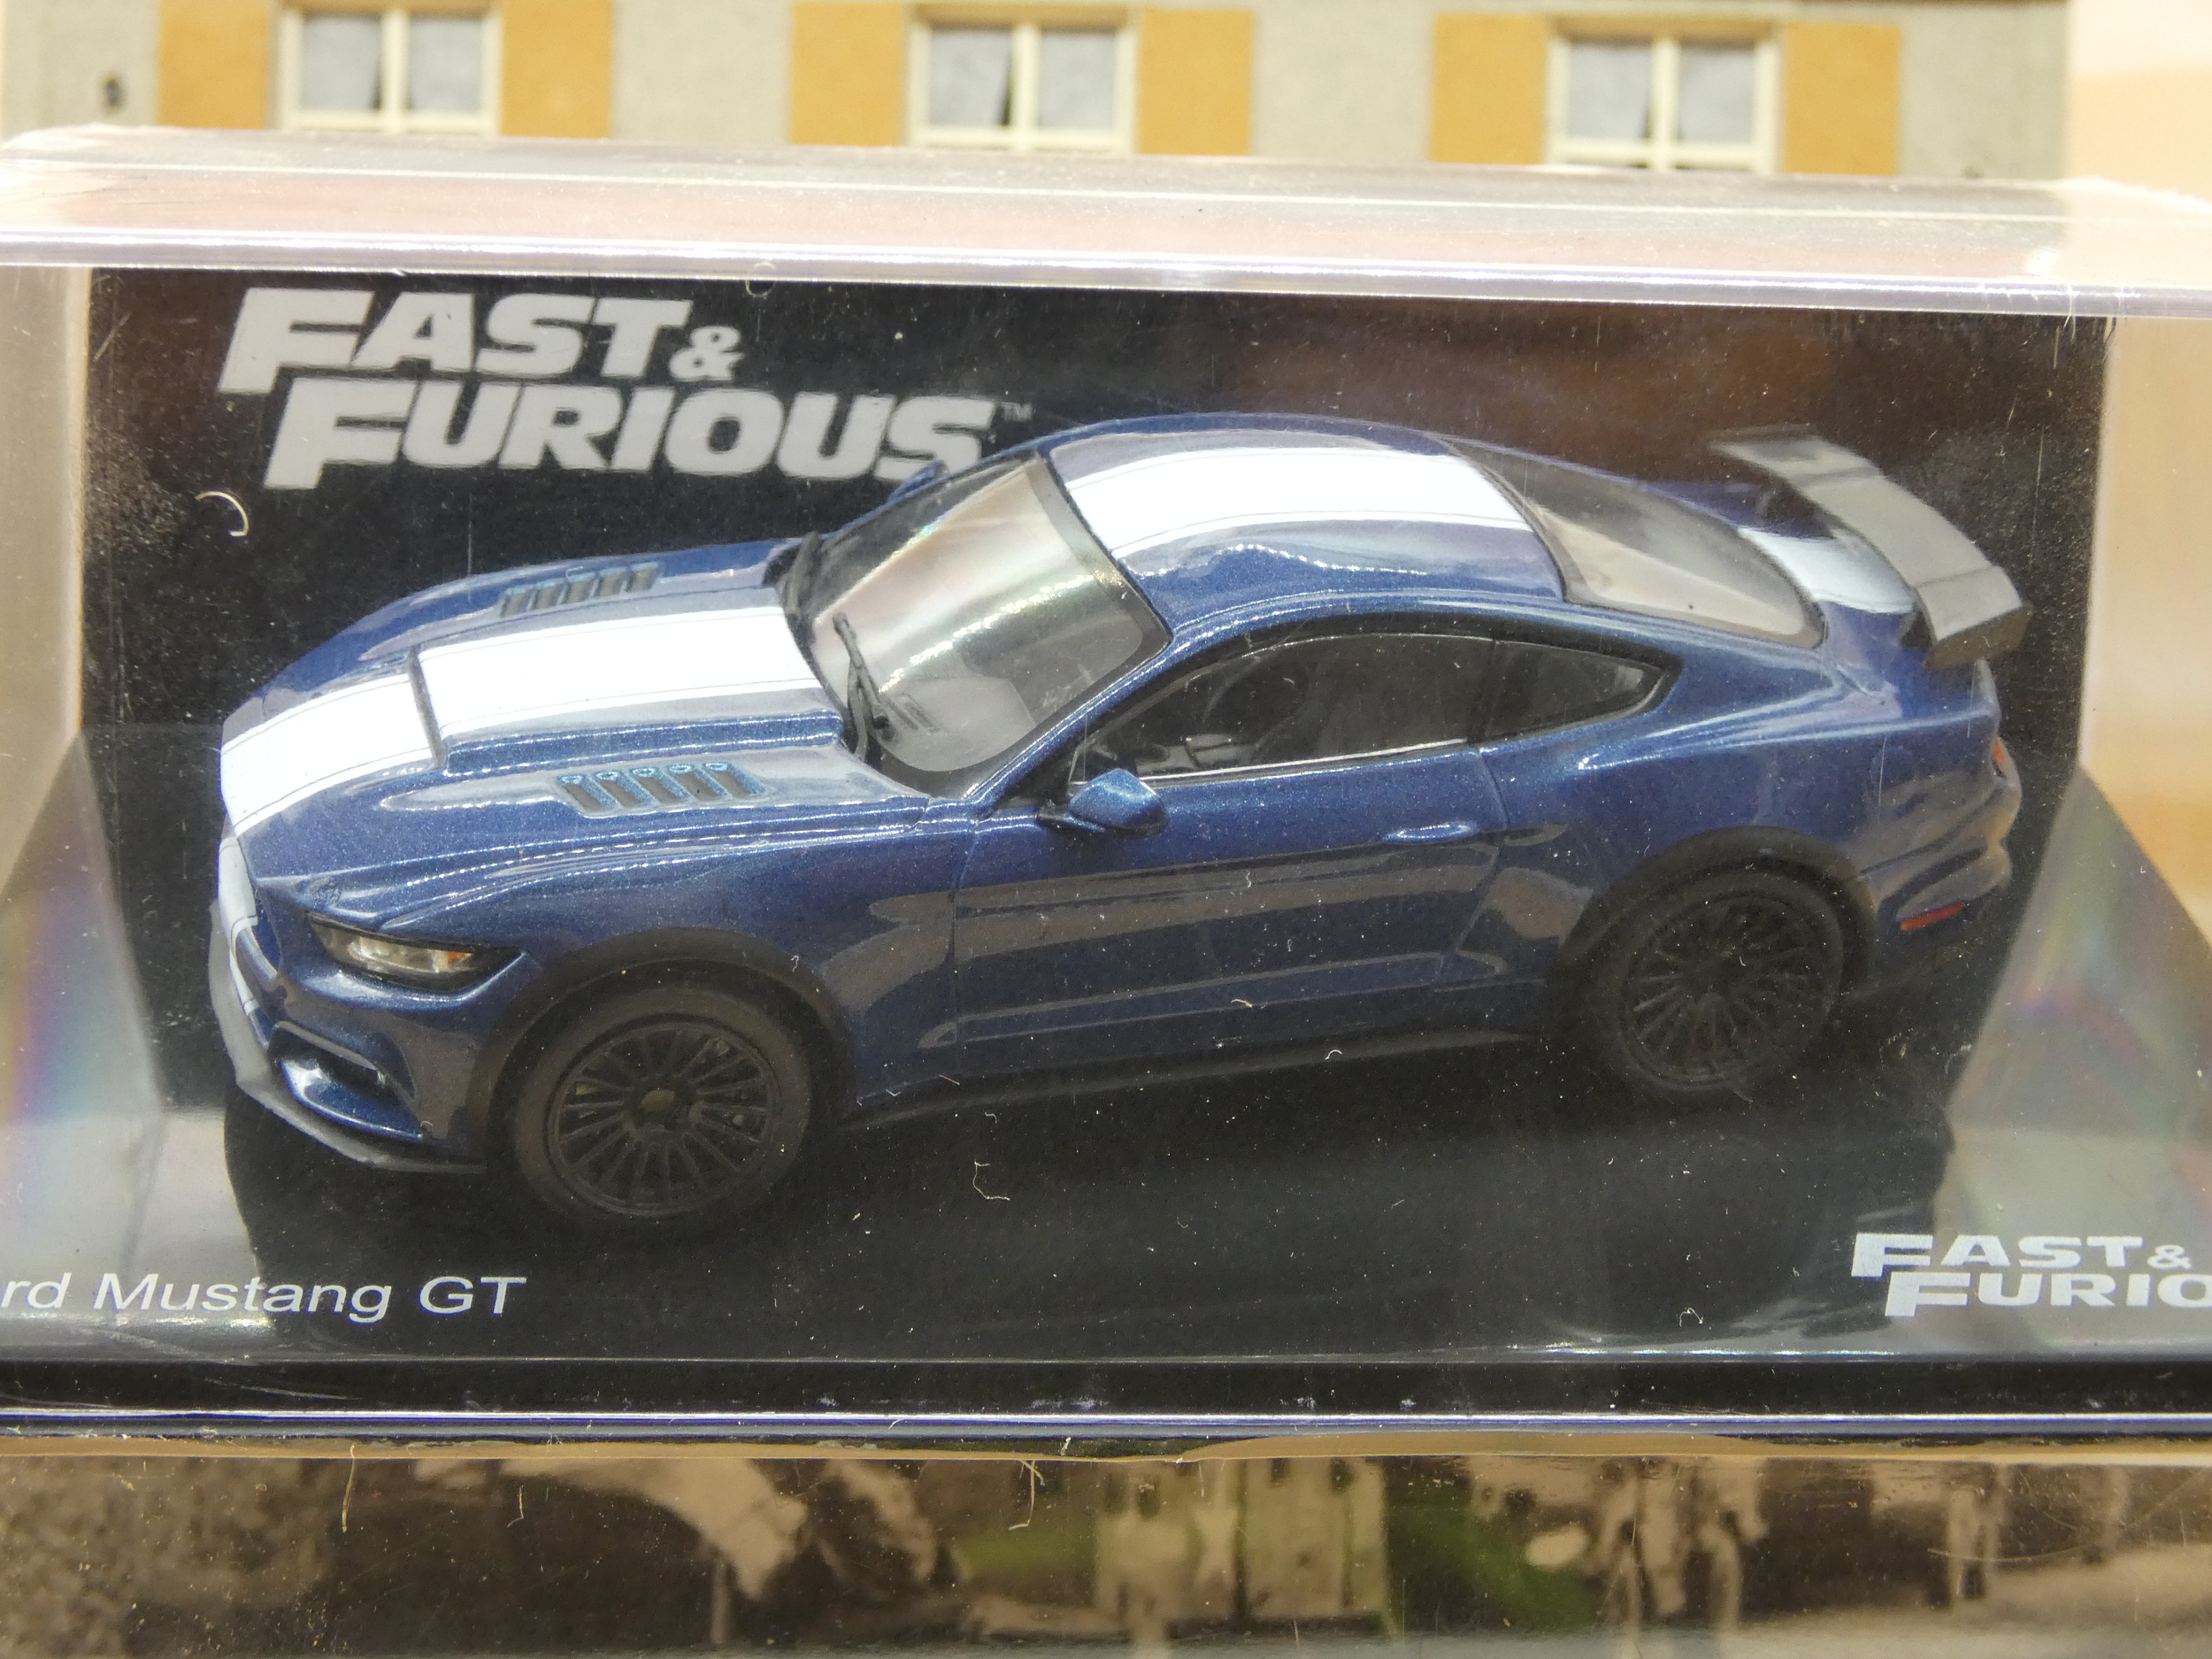 FORD MUSTANG GT 2015 N°13 FAST AND FURIOUS 1/43 IXO NEUF BOITE ORIGINE